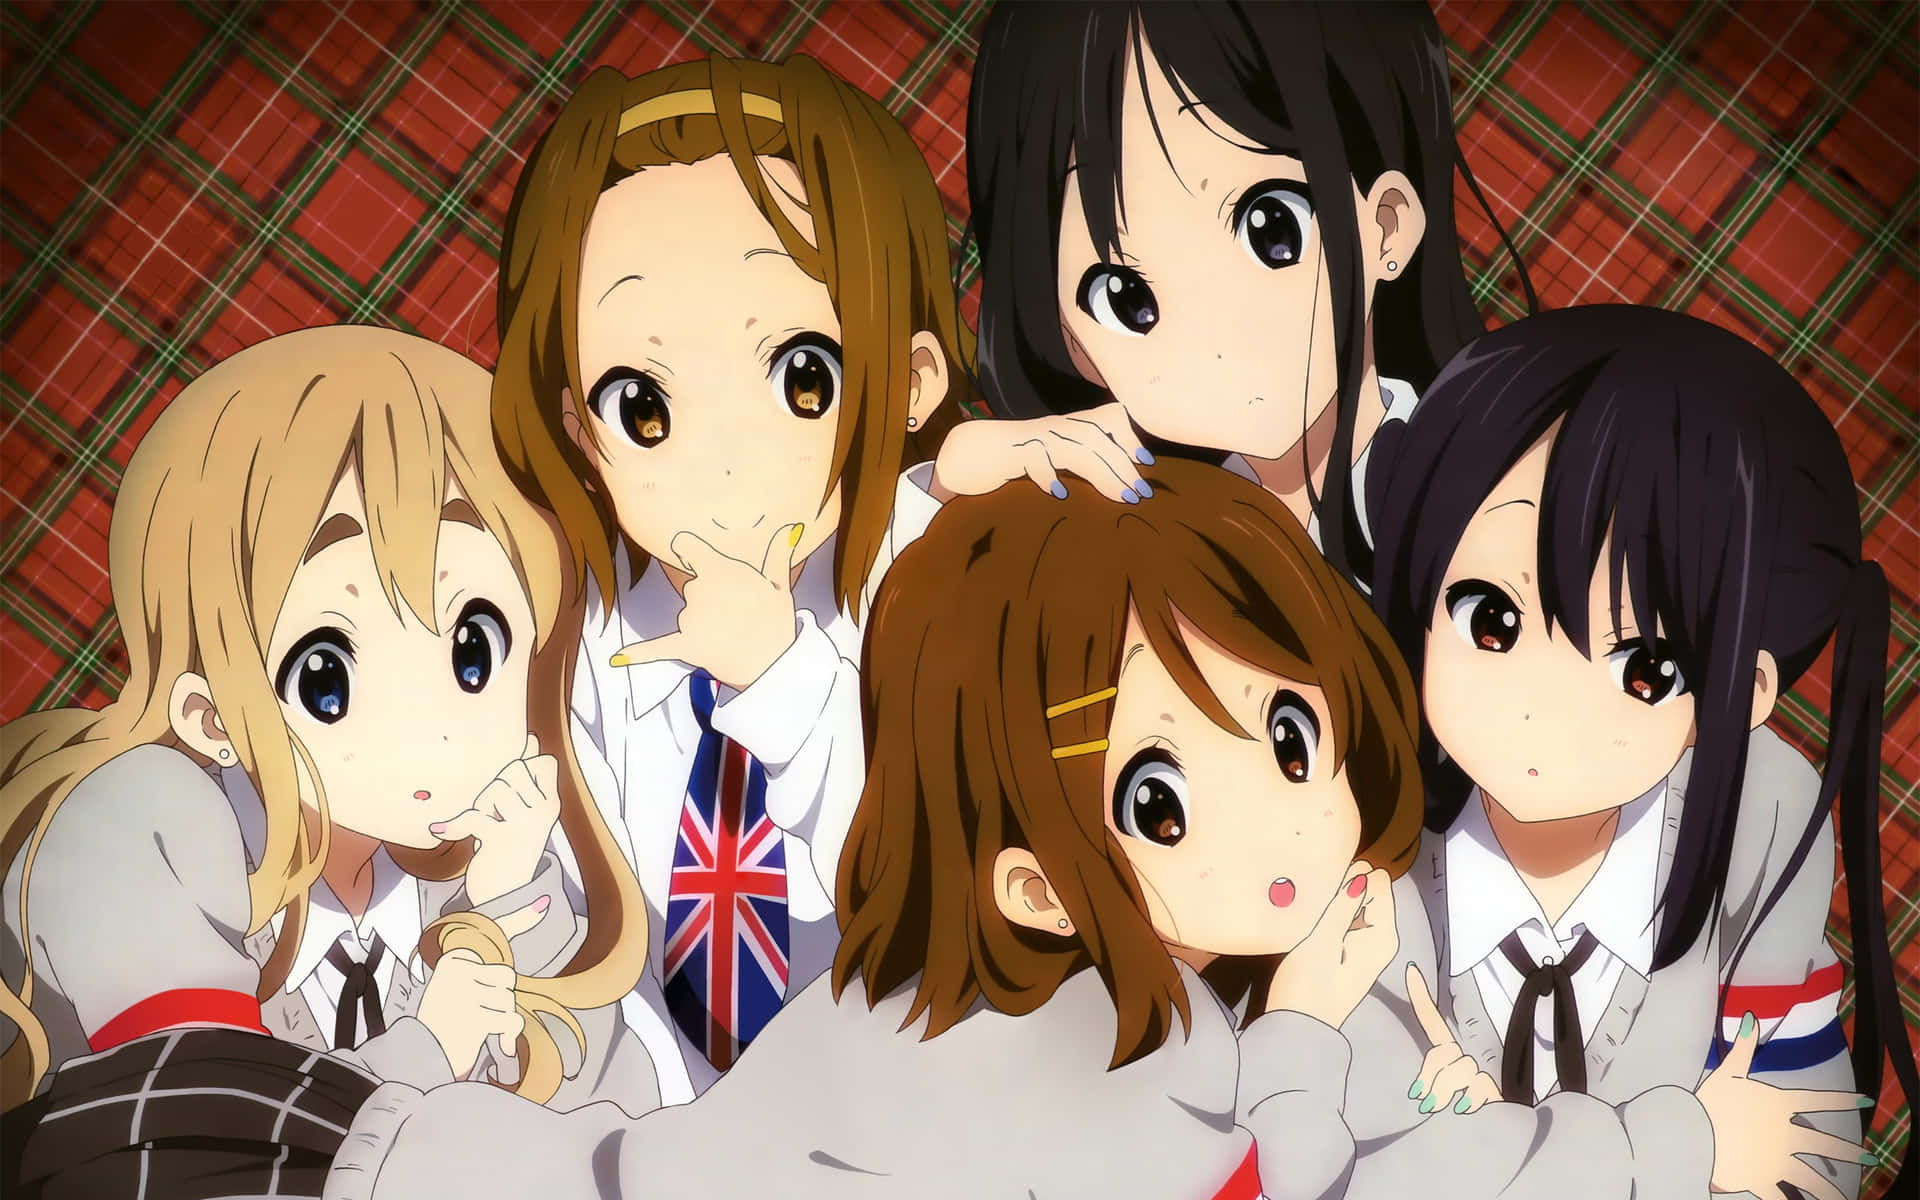 Enjoying a lovely day together with friends in K-on!